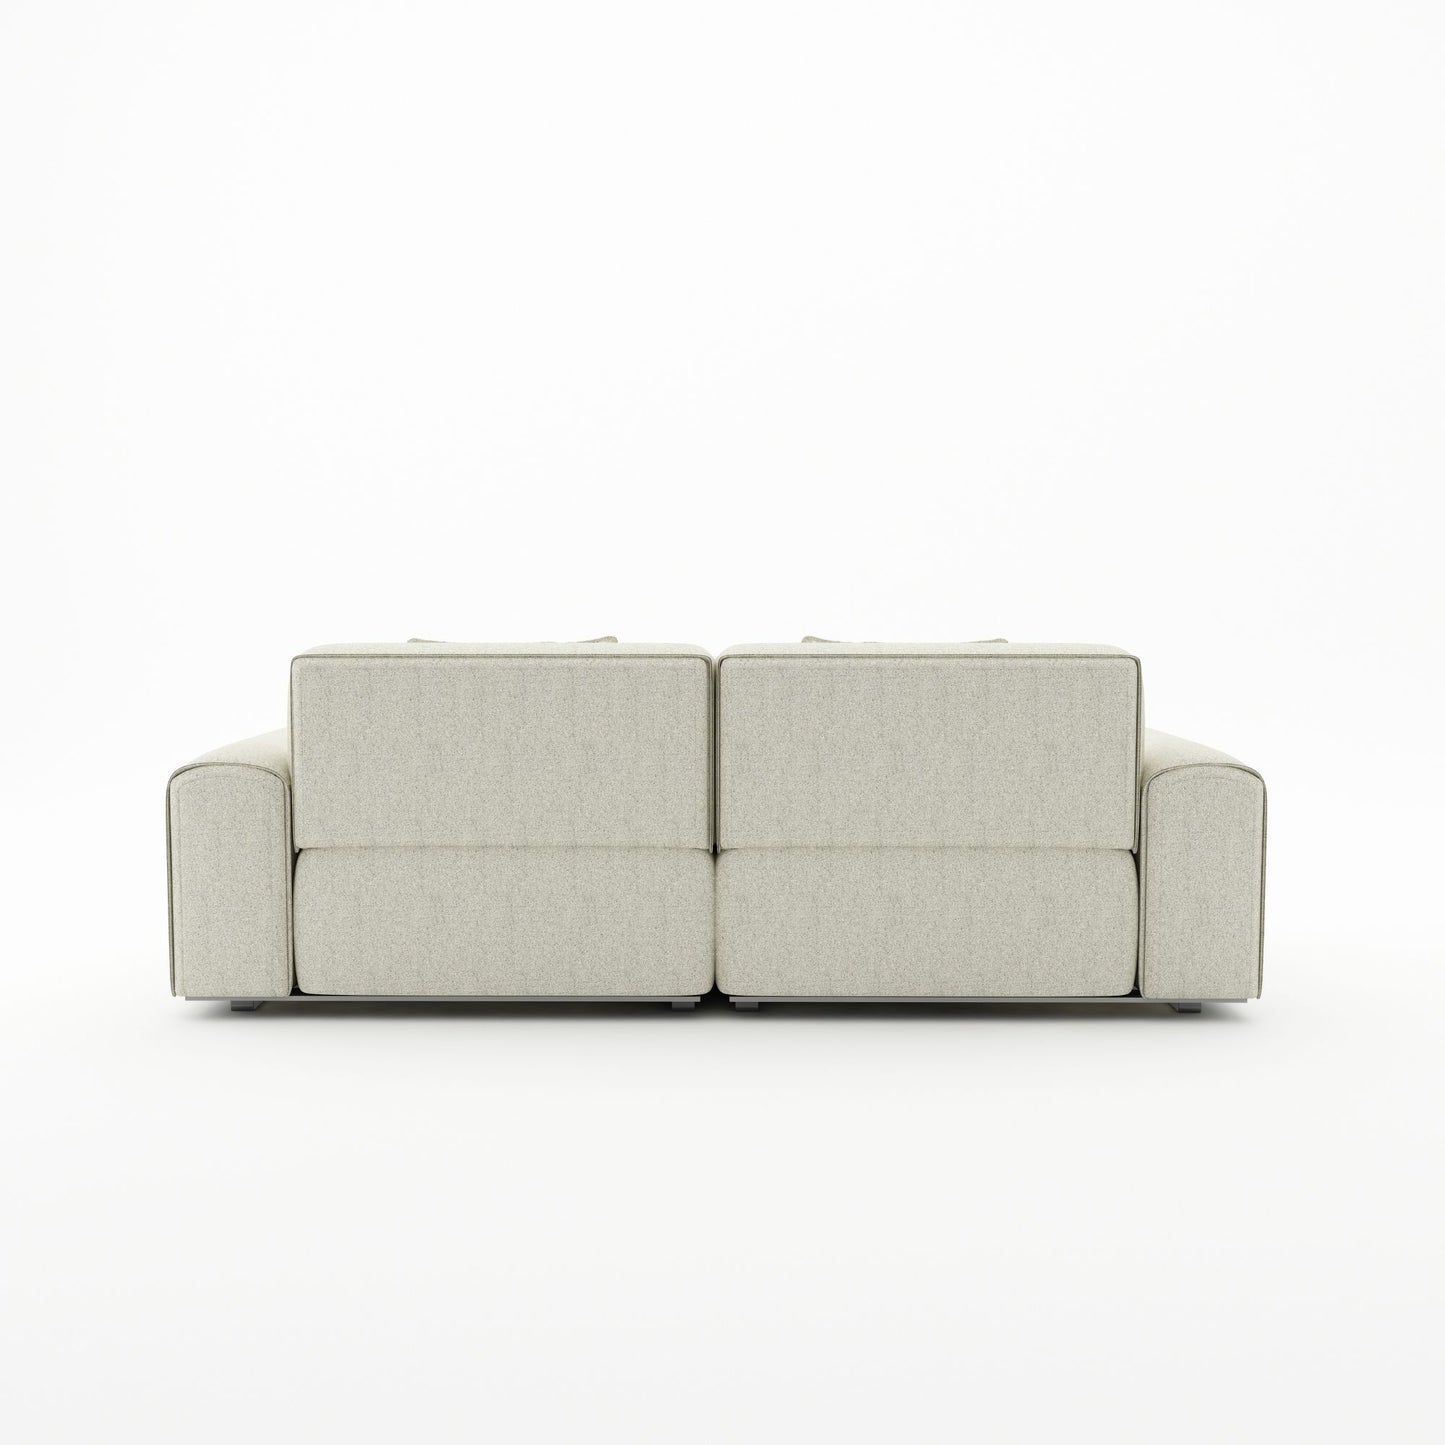 Colby white polyester blend 2 seat fabric sofa